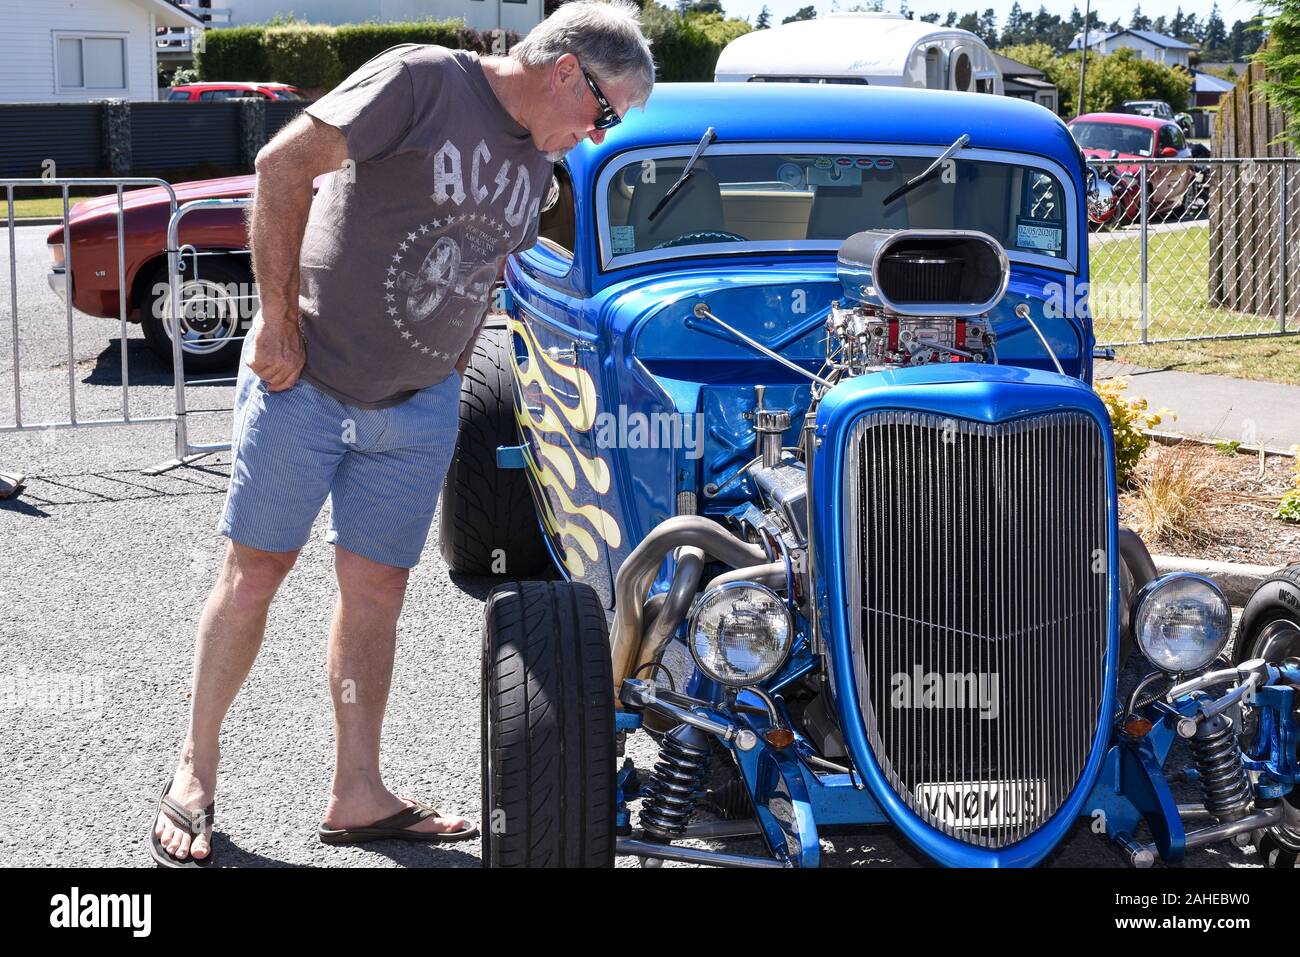 Methven, New Zealand. 28th Dec 2019. Admiring glances as a sunny day brings out the crowds for a gathering of hot rods and other custom cars on the southern island of New Zealand Stock Photo